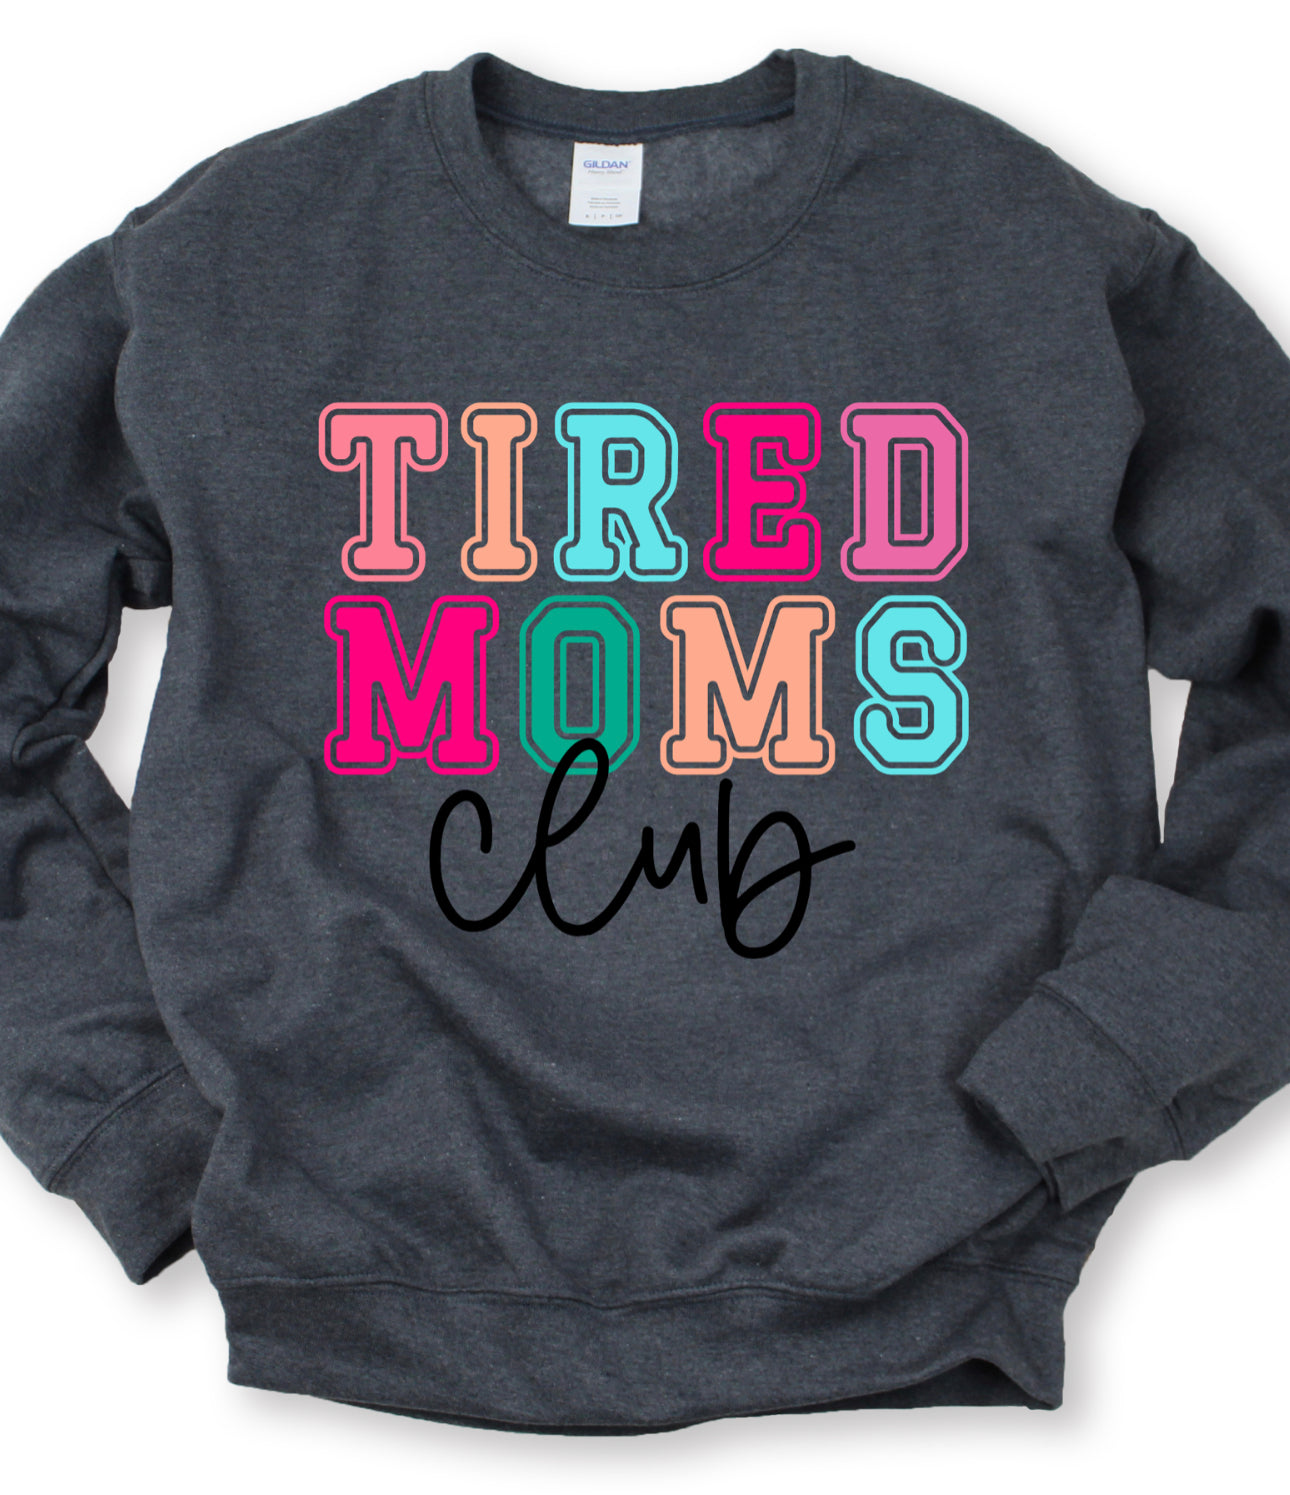 Tired Moms Tee Or Crew